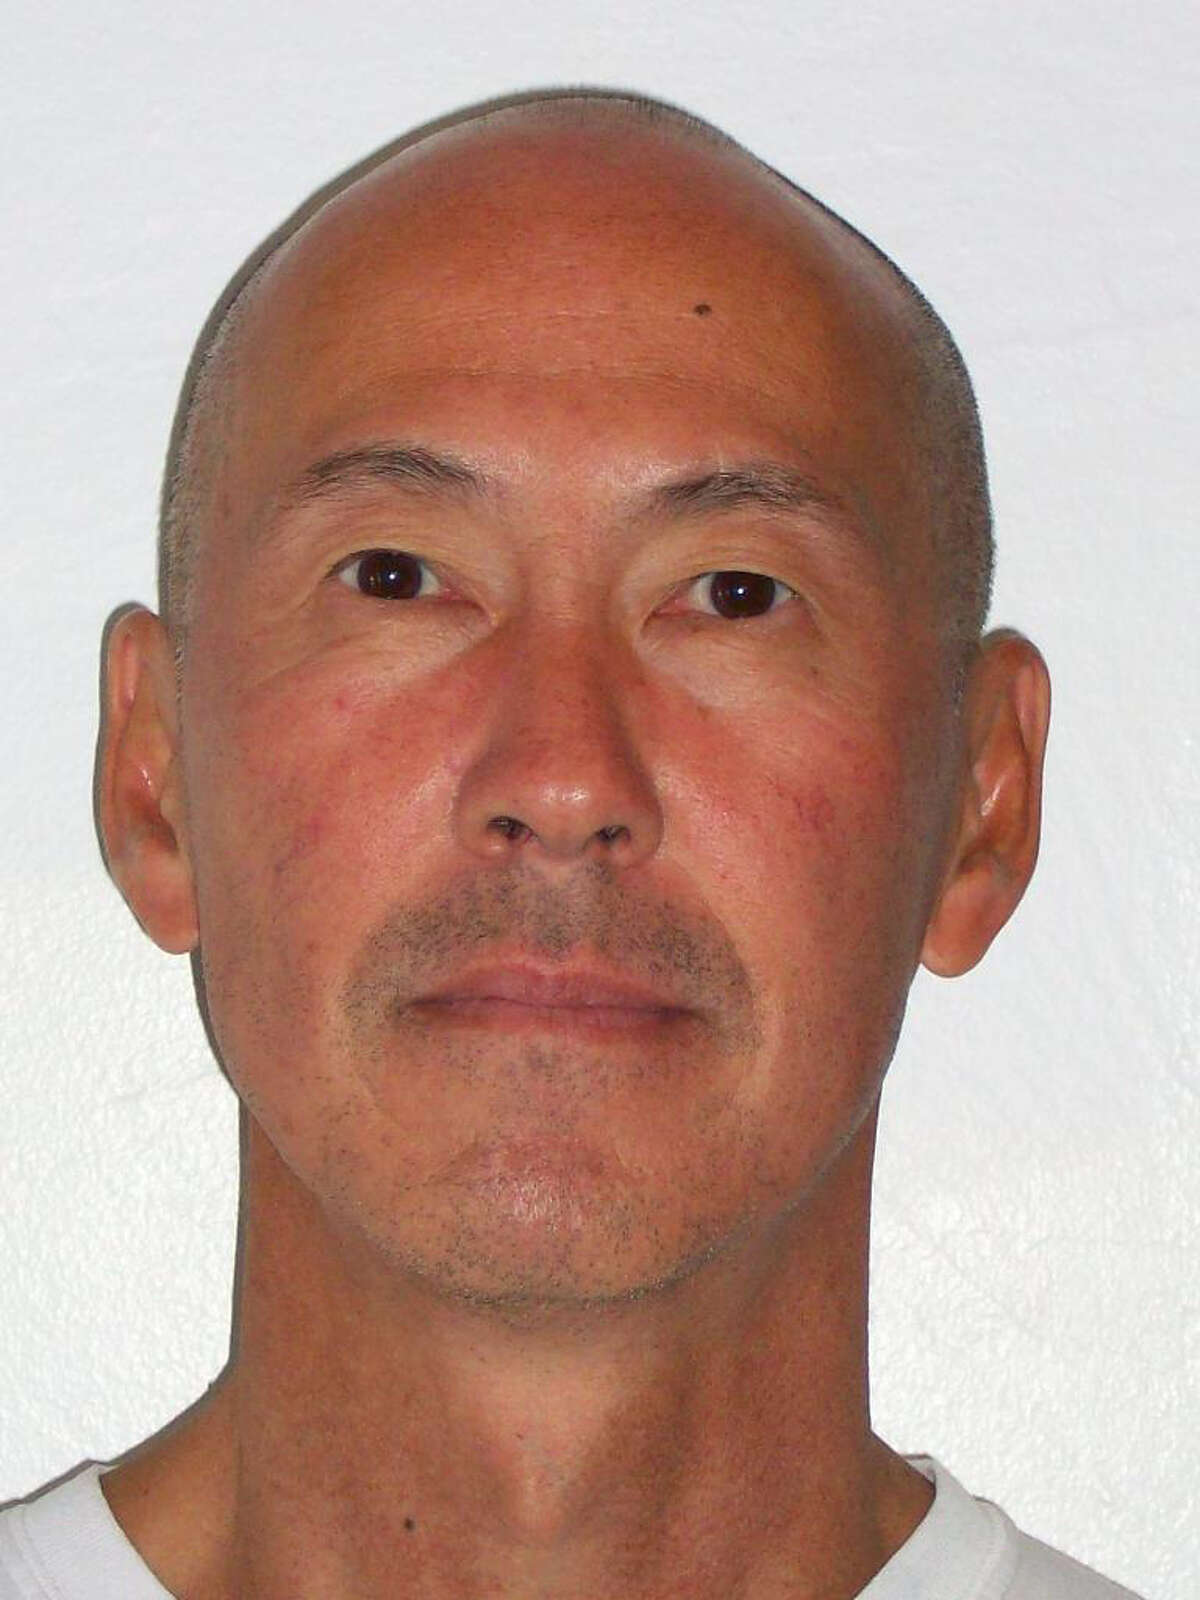 Martin Pang, pictured in 2012 in a Department of Corrections photo.